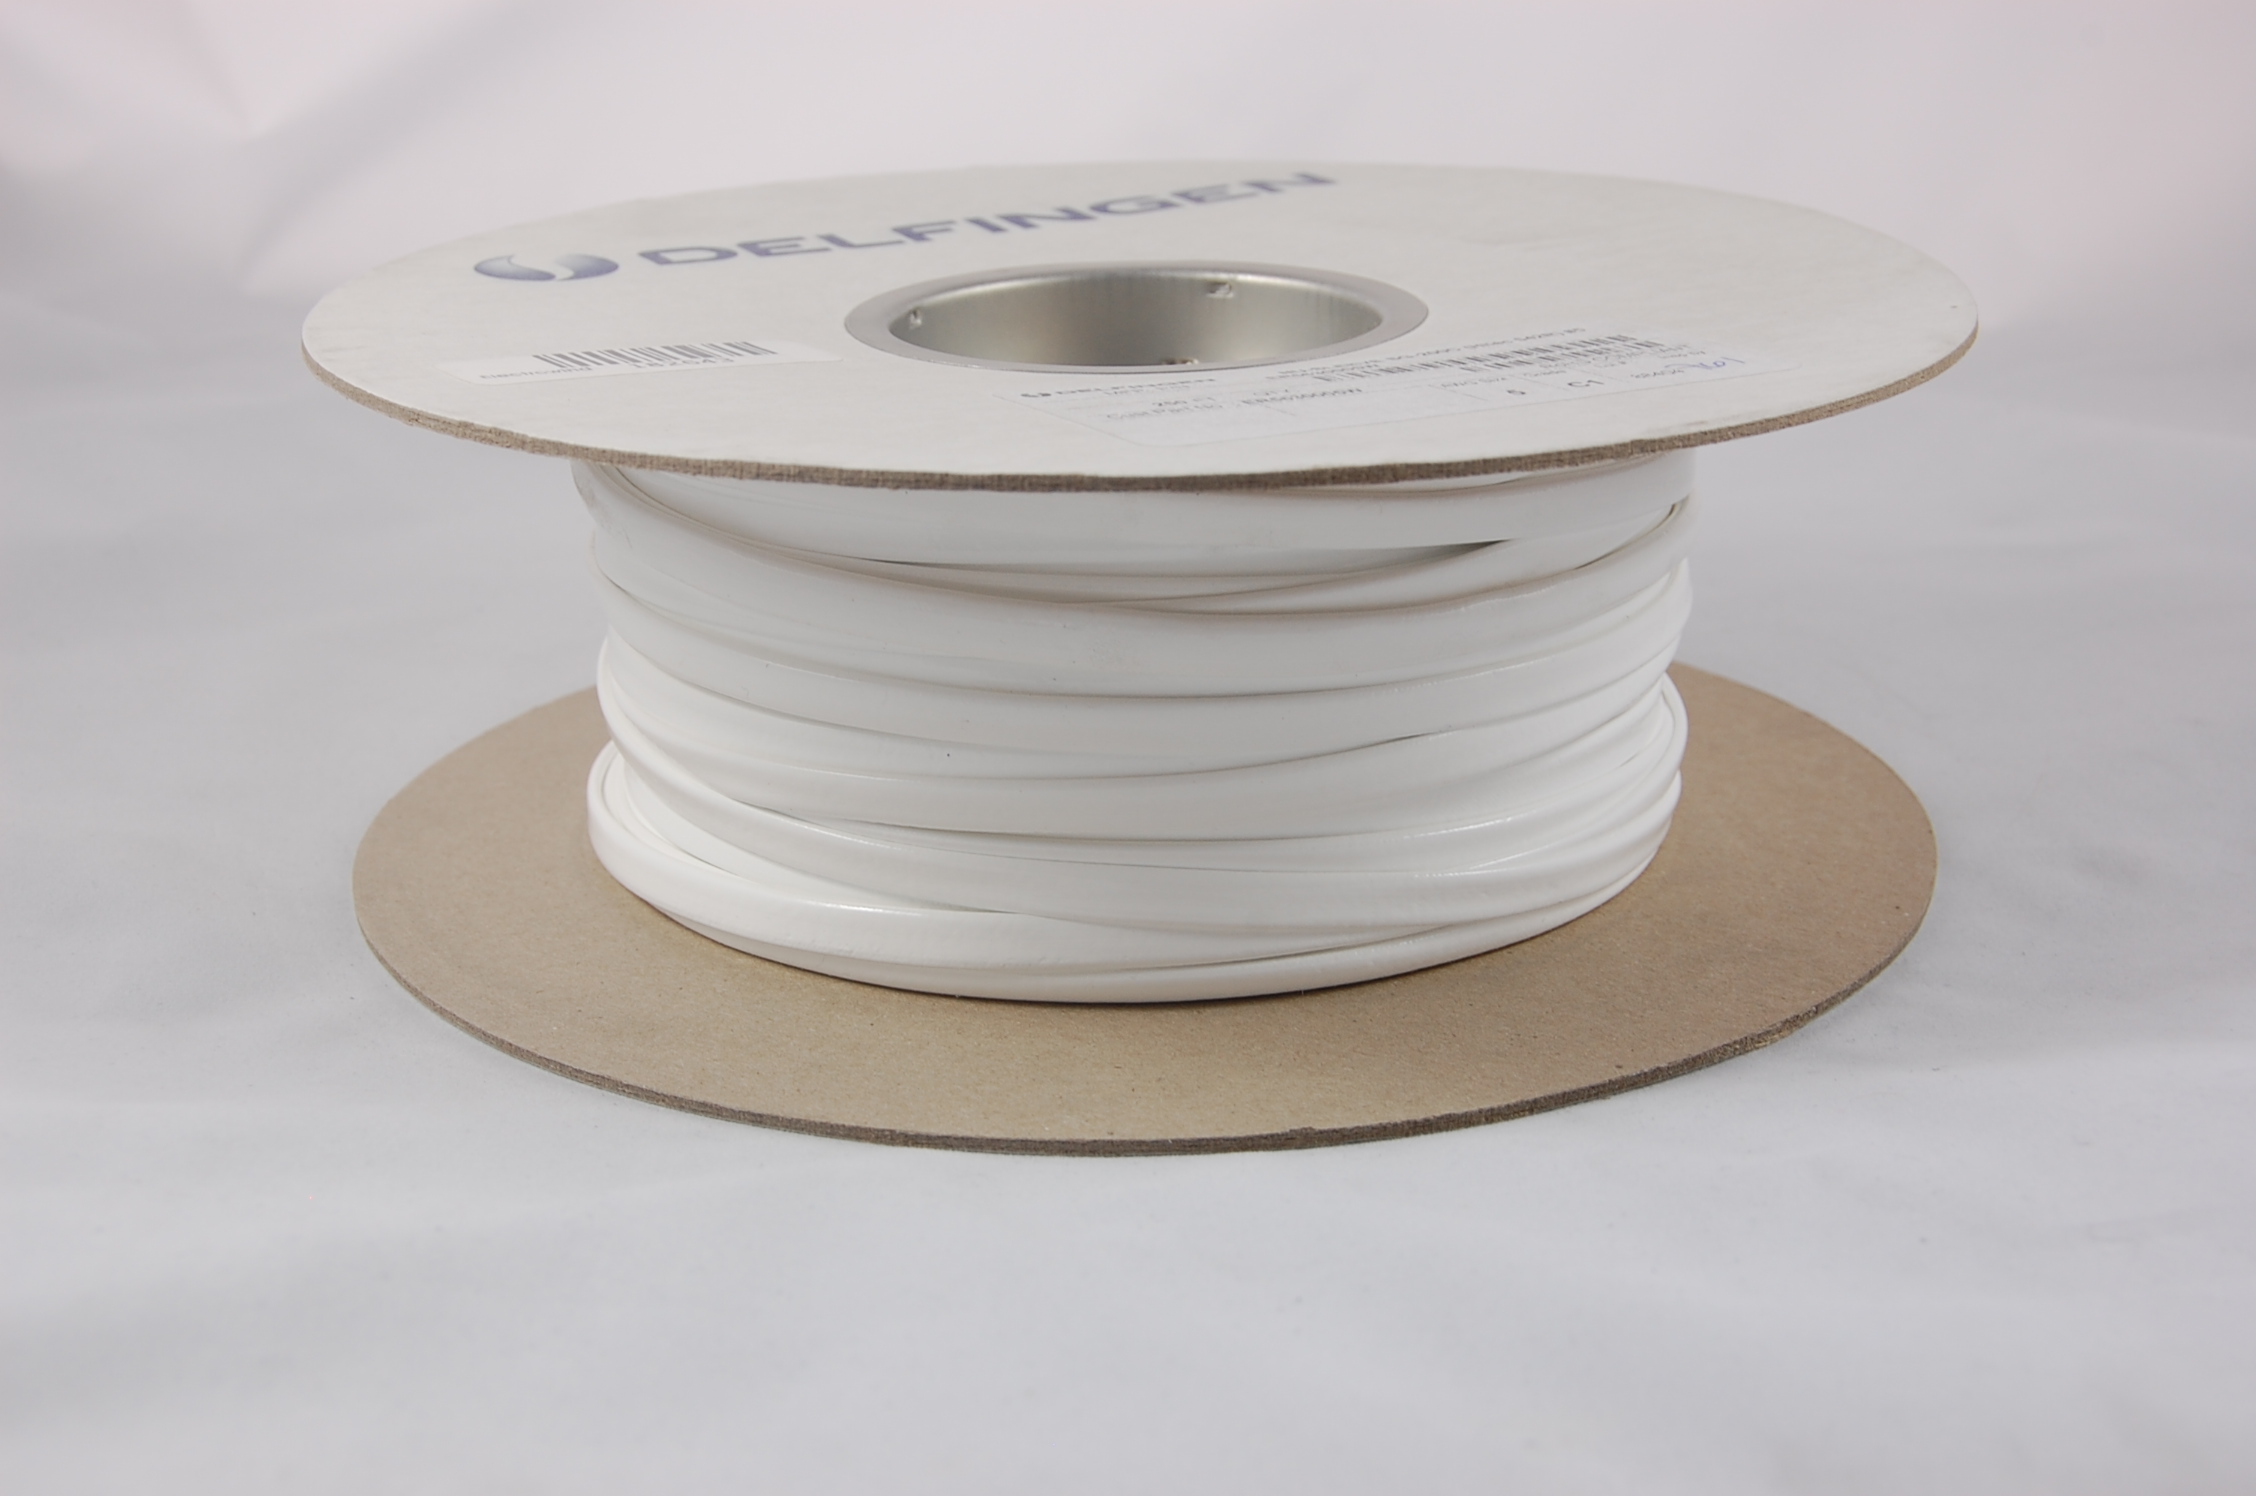 #10 AWG NU-SLEEVE SG-200 A (7000V) Silicone Rubber Coated Braided Fiberglass Sleeving (547F) 200°C, white, 250 FT per spool